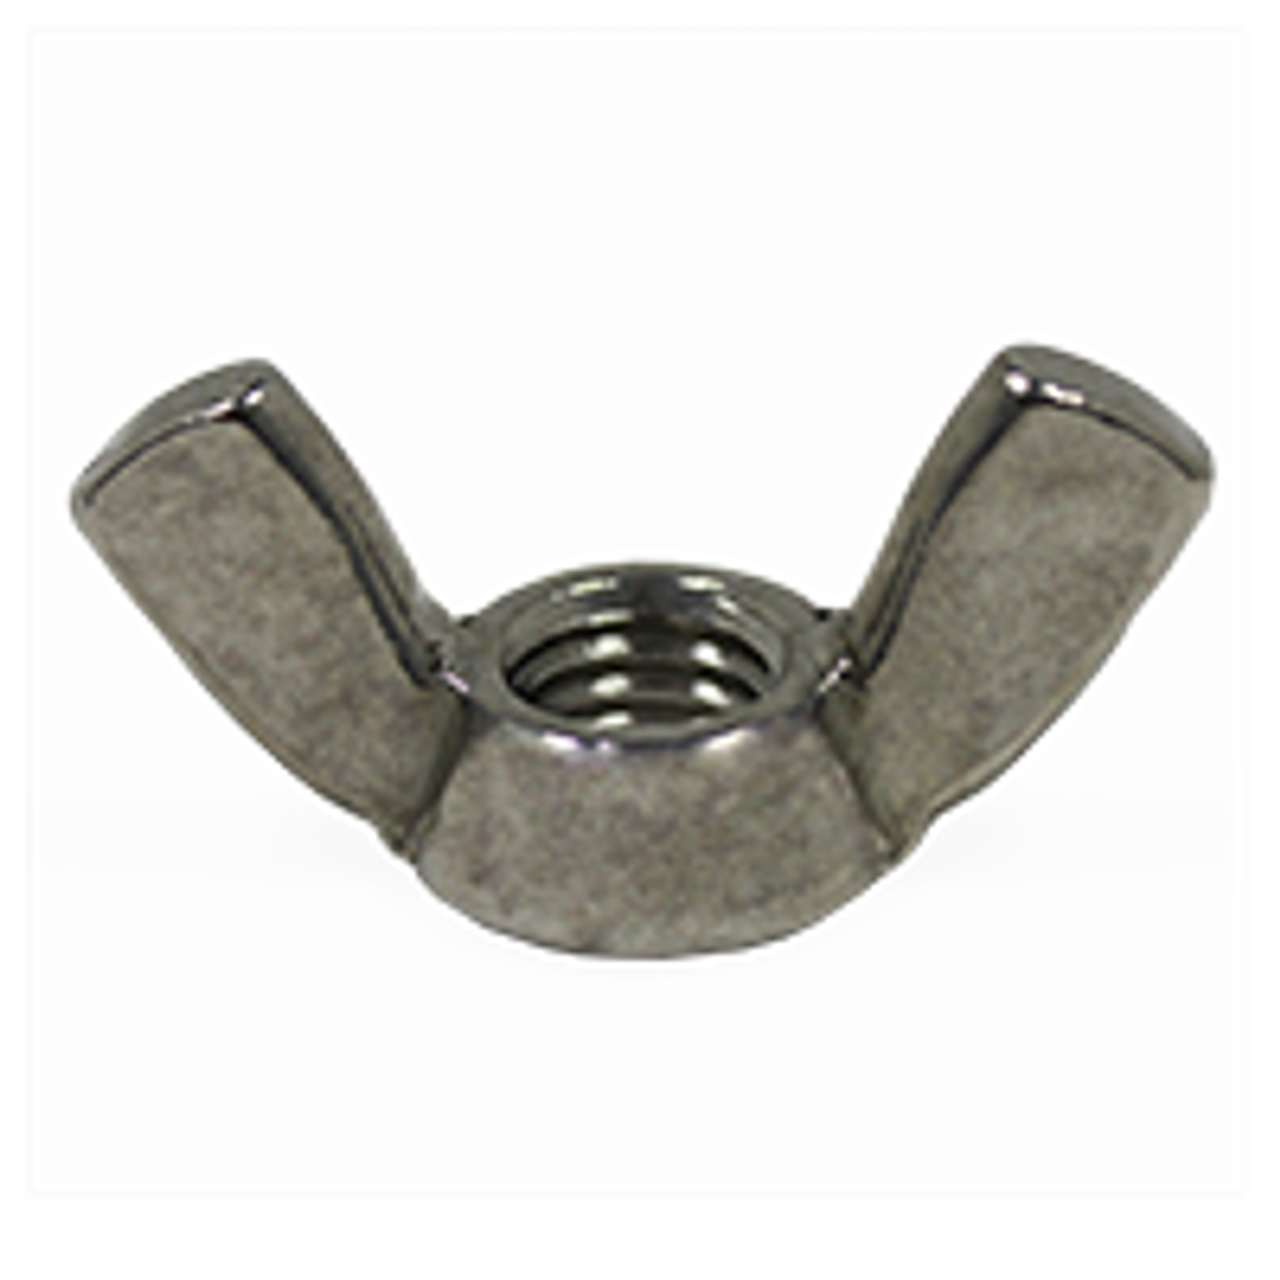 20 Nickle Plated Steel Wing Nuts 1/4" 100 